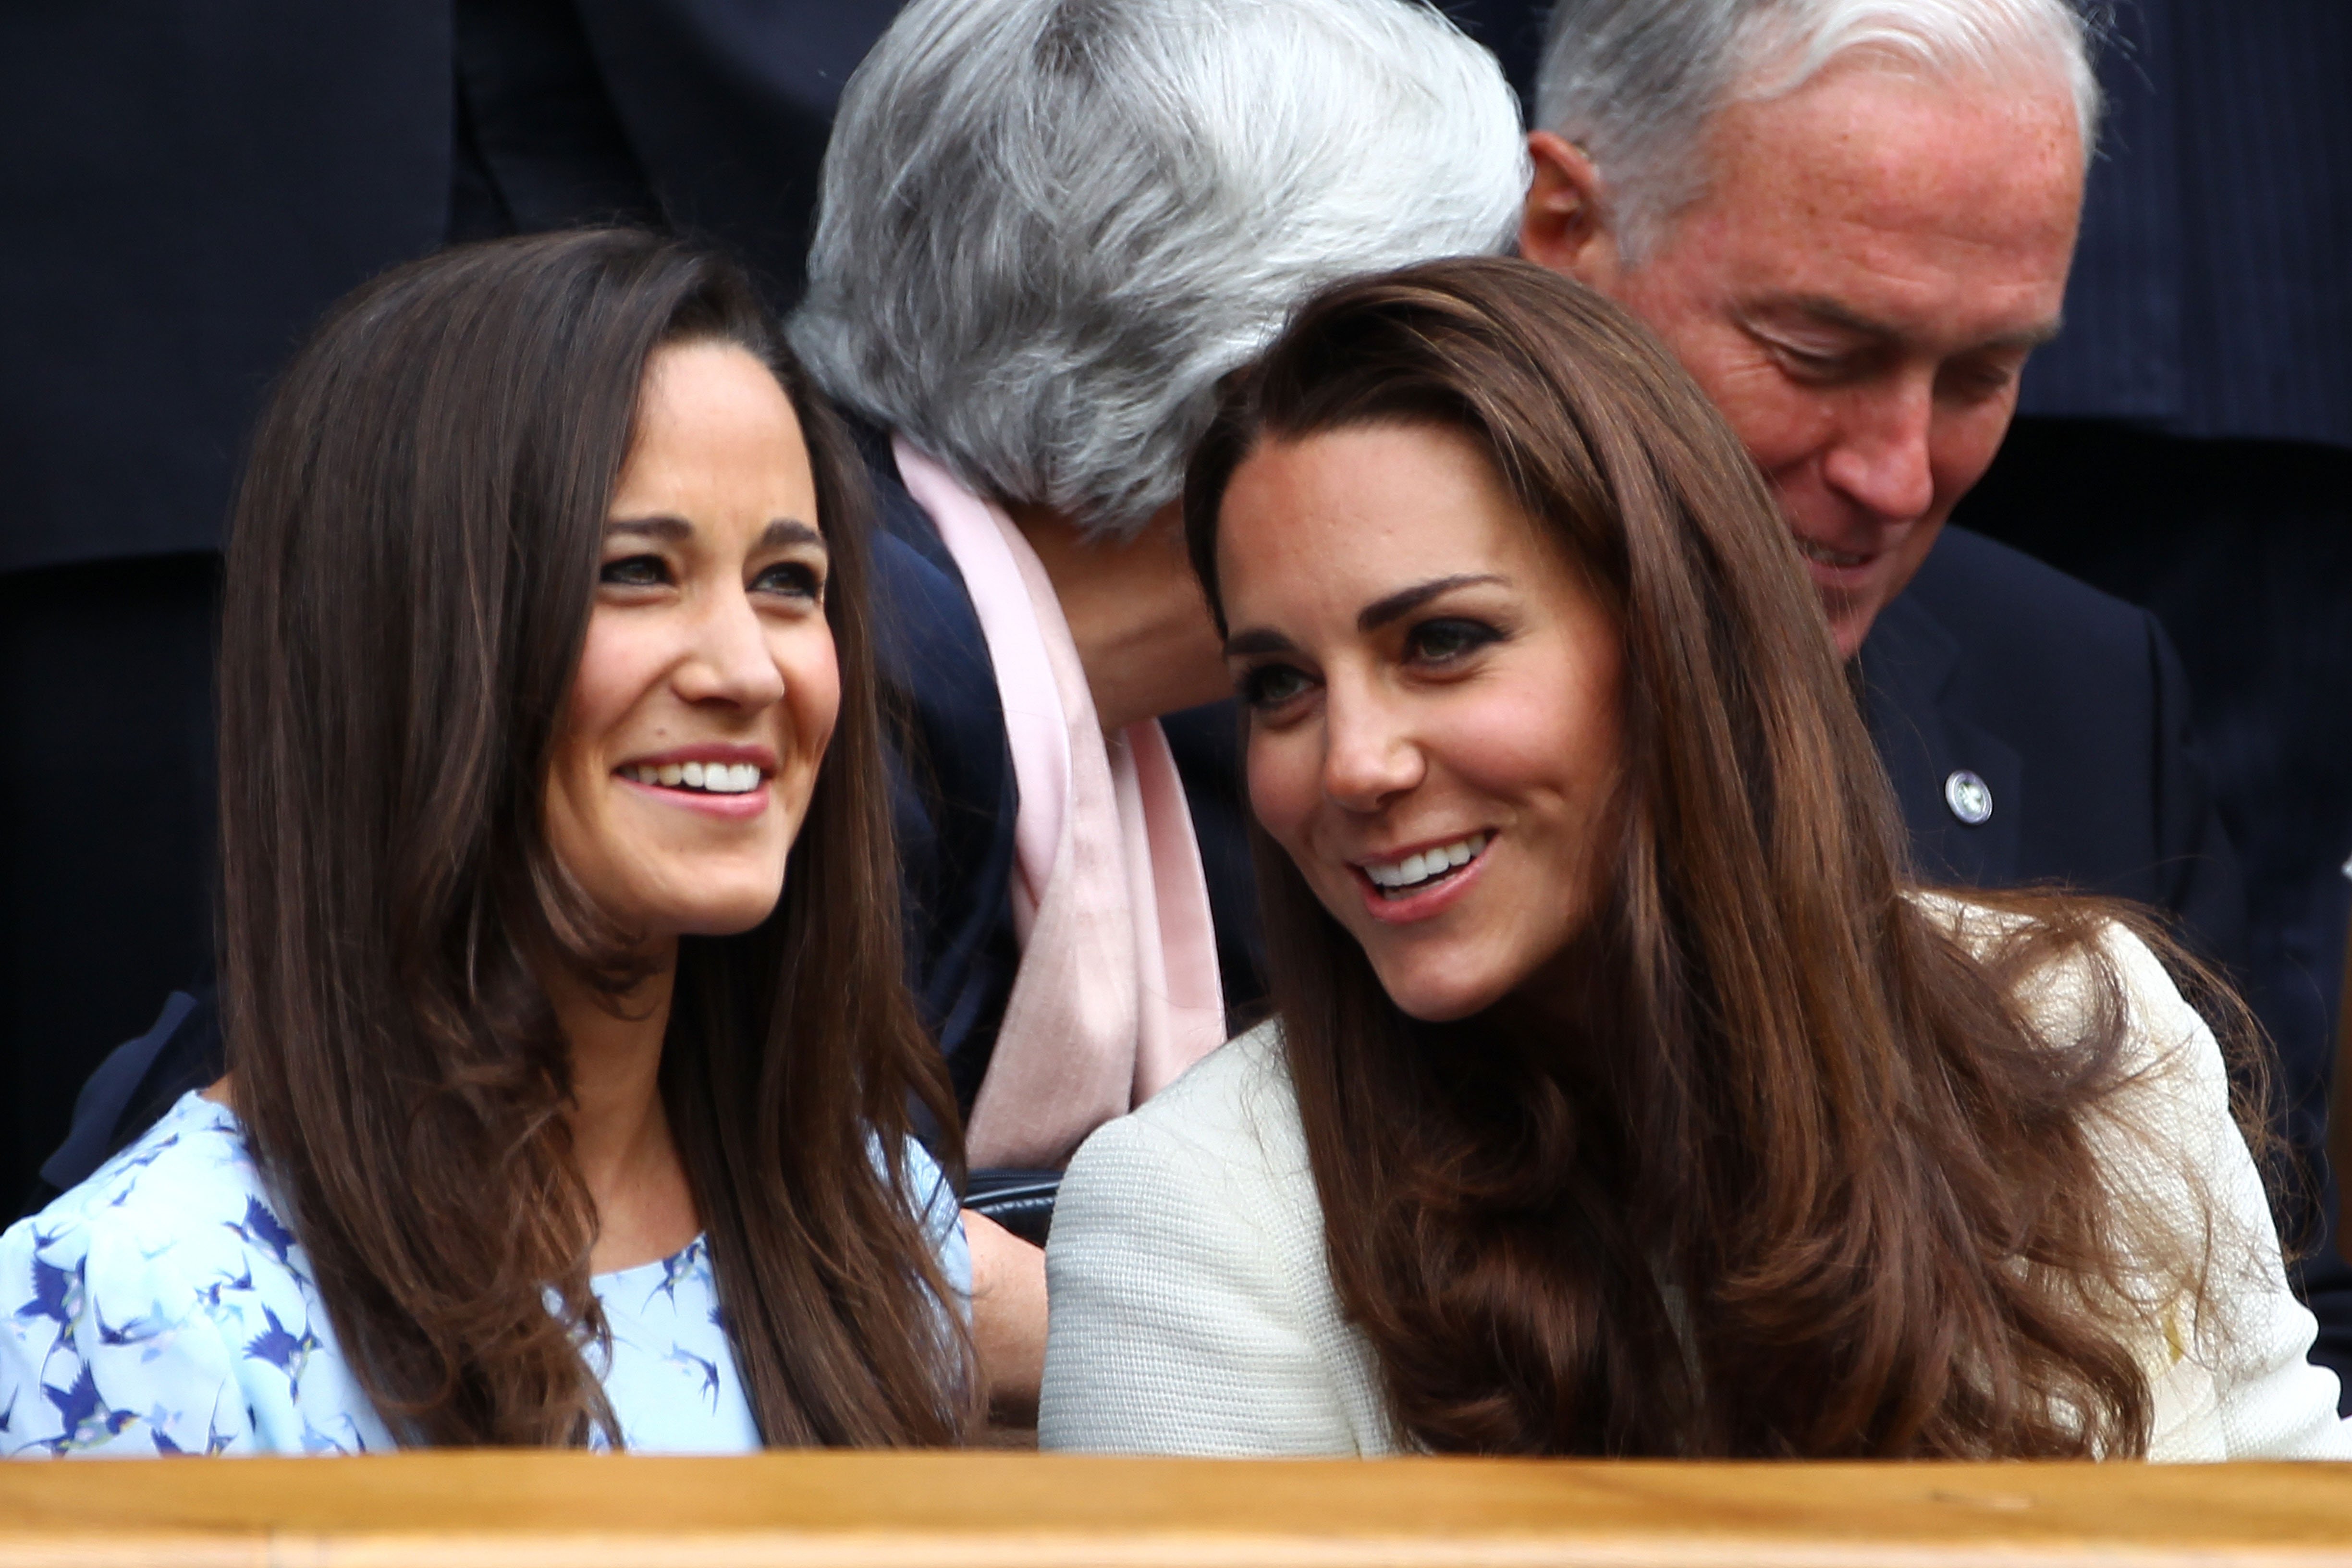 Pippa Middleton and Catherine, Duchess of Cambridge attend day thirteen of the Wimbledon Lawn Tennis Championships at the All England Lawn Tennis and Croquet Club on July 8, 2012 in London, England | Source: Getty Images